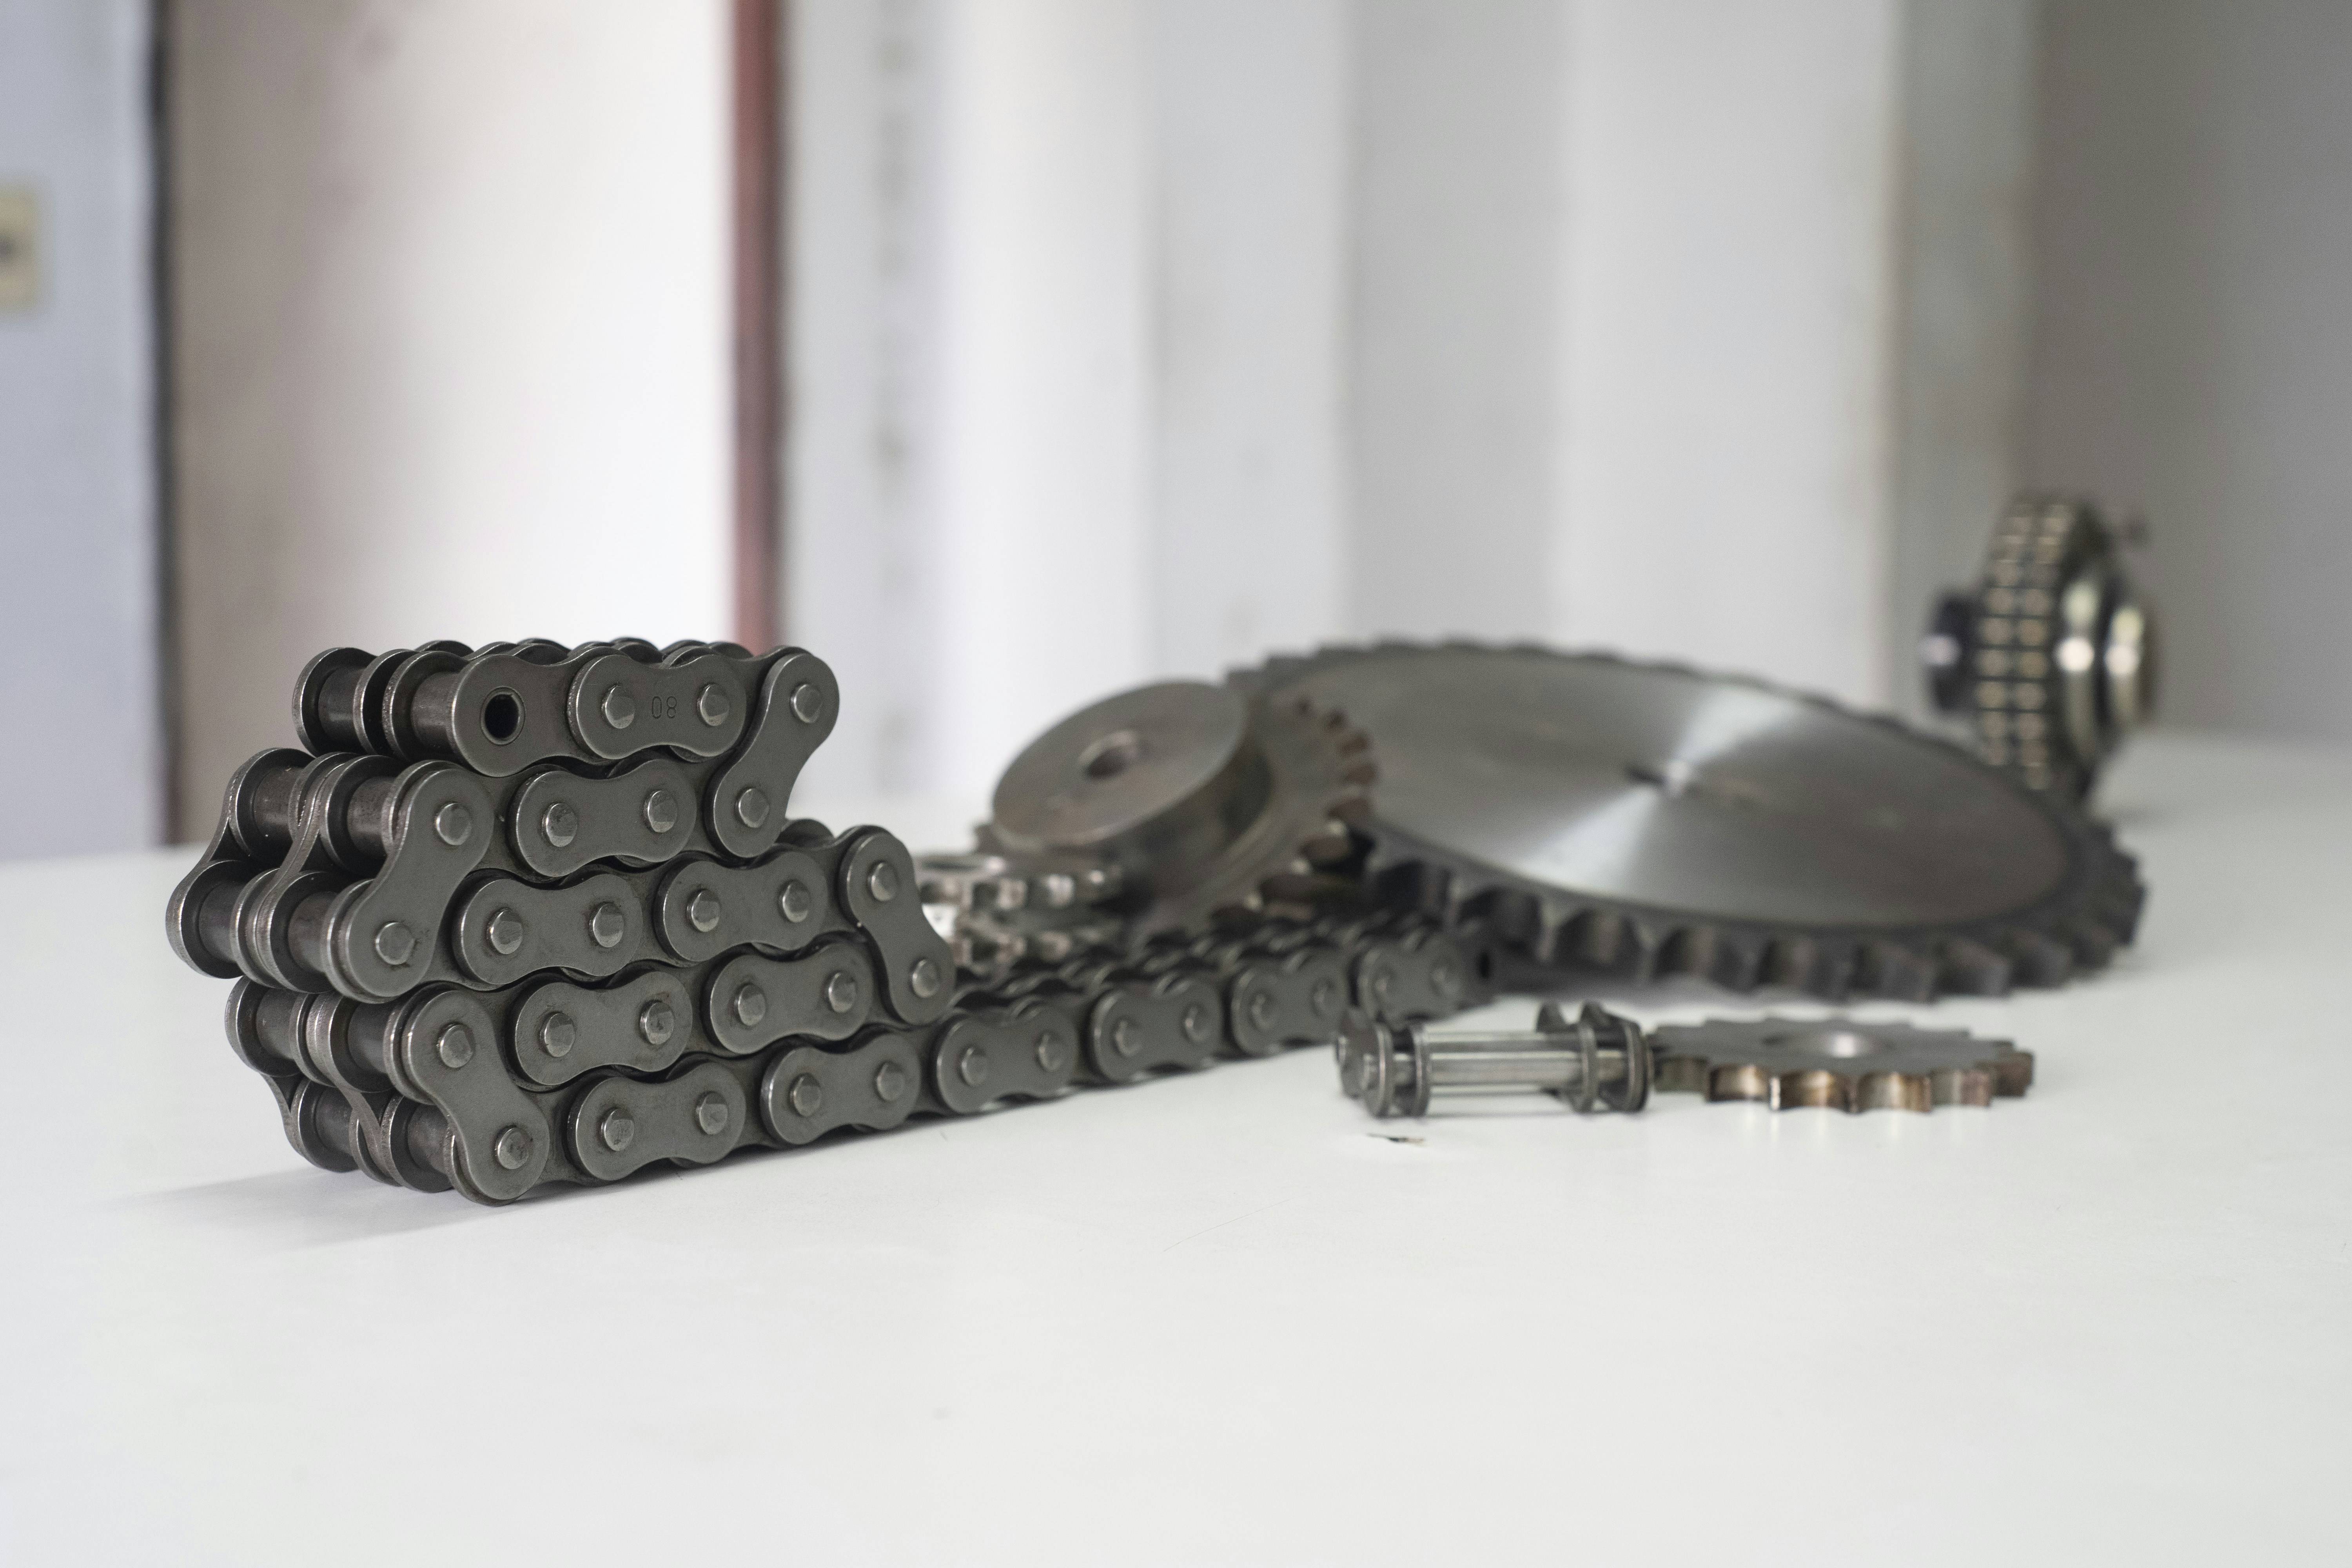 Chain and Sprocket